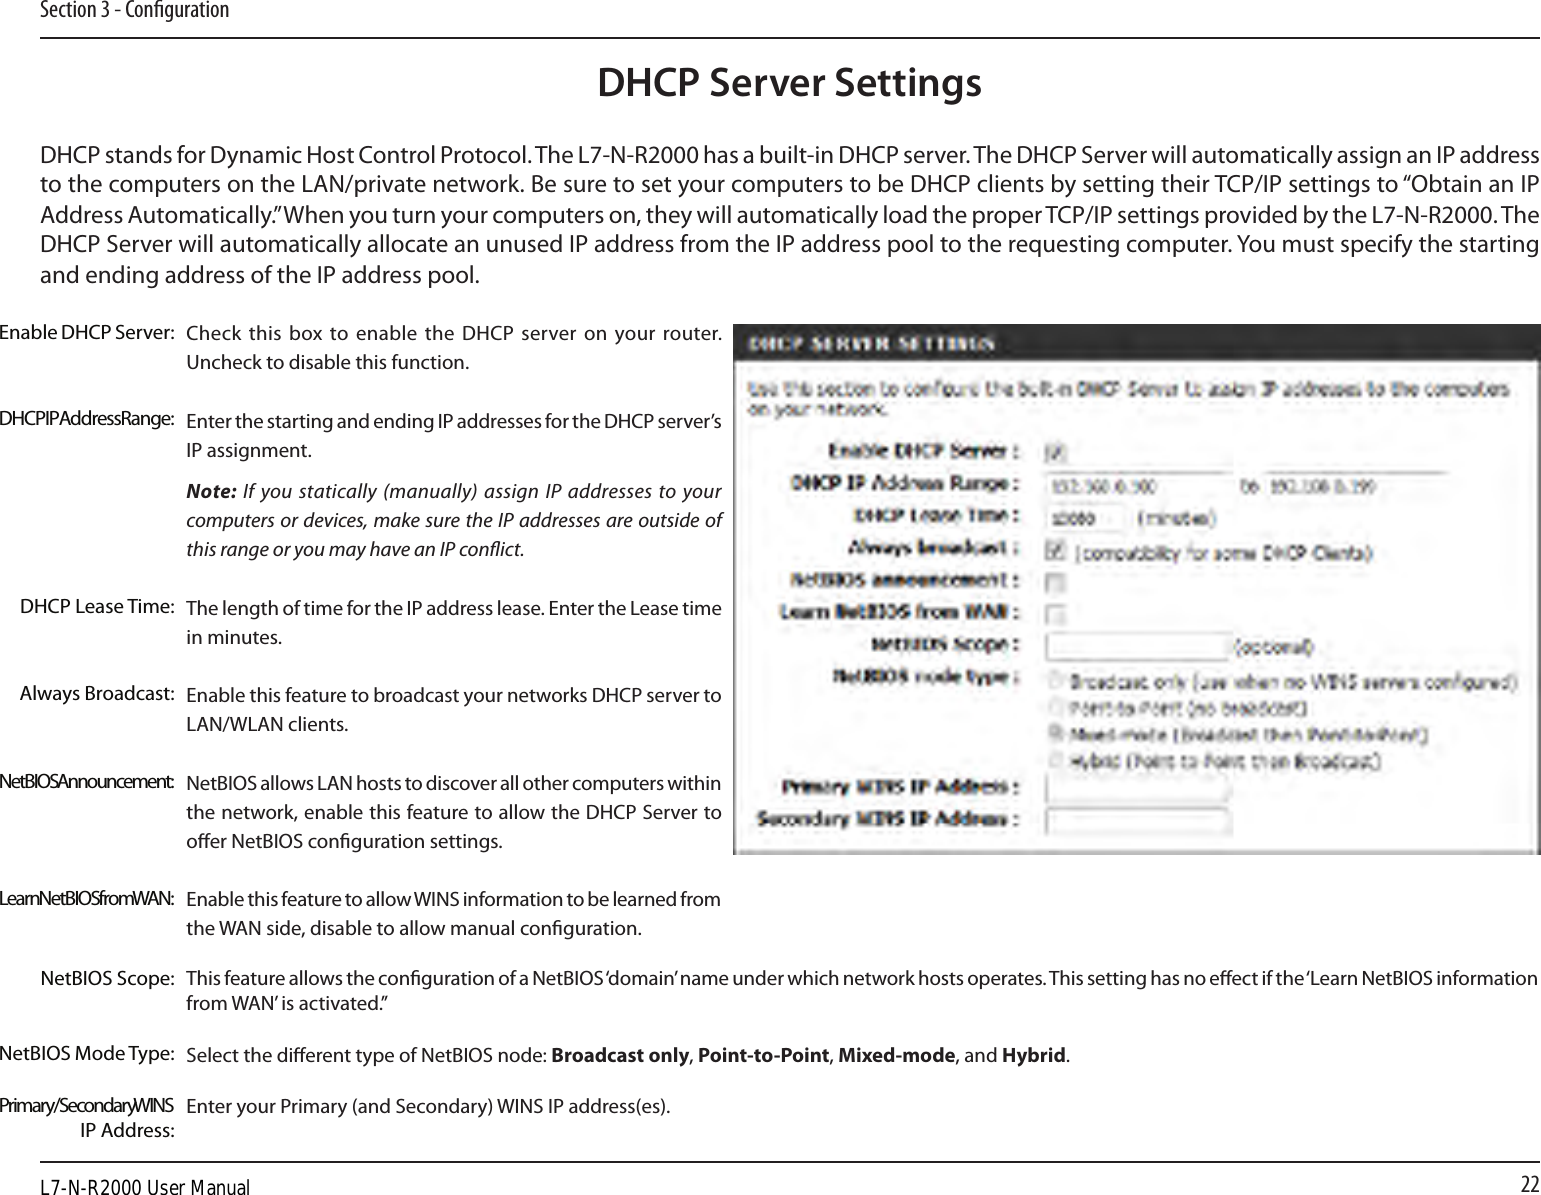 22Section 3 - CongurationDHCP Server SettingsDHCP stands for Dynamic Host Control Protocol. The L7-N-R2000 has a built-in DHCP server. The DHCP Server will automatically assign an IP address to the computers on the LAN/private network. Be sure to set your computers to be DHCP clients by setting their TCP/IP settings to “Obtain an IP Address Automatically.” When you turn your computers on, they will automatically load the proper TCP/IP settings provided by the L7-N-R2000. The DHCP Server will automatically allocate an unused IP address from the IP address pool to the requesting computer. You must specify the starting and ending address of the IP address pool.Check this  box to  enable the DHCP  server on  your router. Uncheck to disable this function.Enter the starting and ending IP addresses for the DHCP server’s IP assignment.Note: If you statically (manually) assign IP addresses to your computers or devices, make sure the IP addresses are outside of this range or you may have an IP conict. The length of time for the IP address lease. Enter the Lease time in minutes.Enable this feature to broadcast your networks DHCP server to LAN/WLAN clients.NetBIOS allows LAN hosts to discover all other computers within the network, enable this feature to allow the DHCP Server to oer NetBIOS conguration settings.Enable this feature to allow WINS information to be learned from the WAN side, disable to allow manual conguration.This feature allows the conguration of a NetBIOS ‘domain’ name under which network hosts operates. This setting has no eect if the ‘Learn NetBIOS information from WAN’ is activated.”Select the dierent type of NetBIOS node: Broadcast only, Point-to-Point, Mixed-mode, and Hybrid.Enter your Primary (and Secondary) WINS IP address(es).Enable DHCP Server:DHCP IP Address Range:DHCP Lease Time:Always Broadcast:NetBIOS Announcement:Learn NetBIOS from WAN:NetBIOS Scope:NetBIOS Mode Type:Primary/Secondary WINS IP Address:L7-N-R2000 User Manual